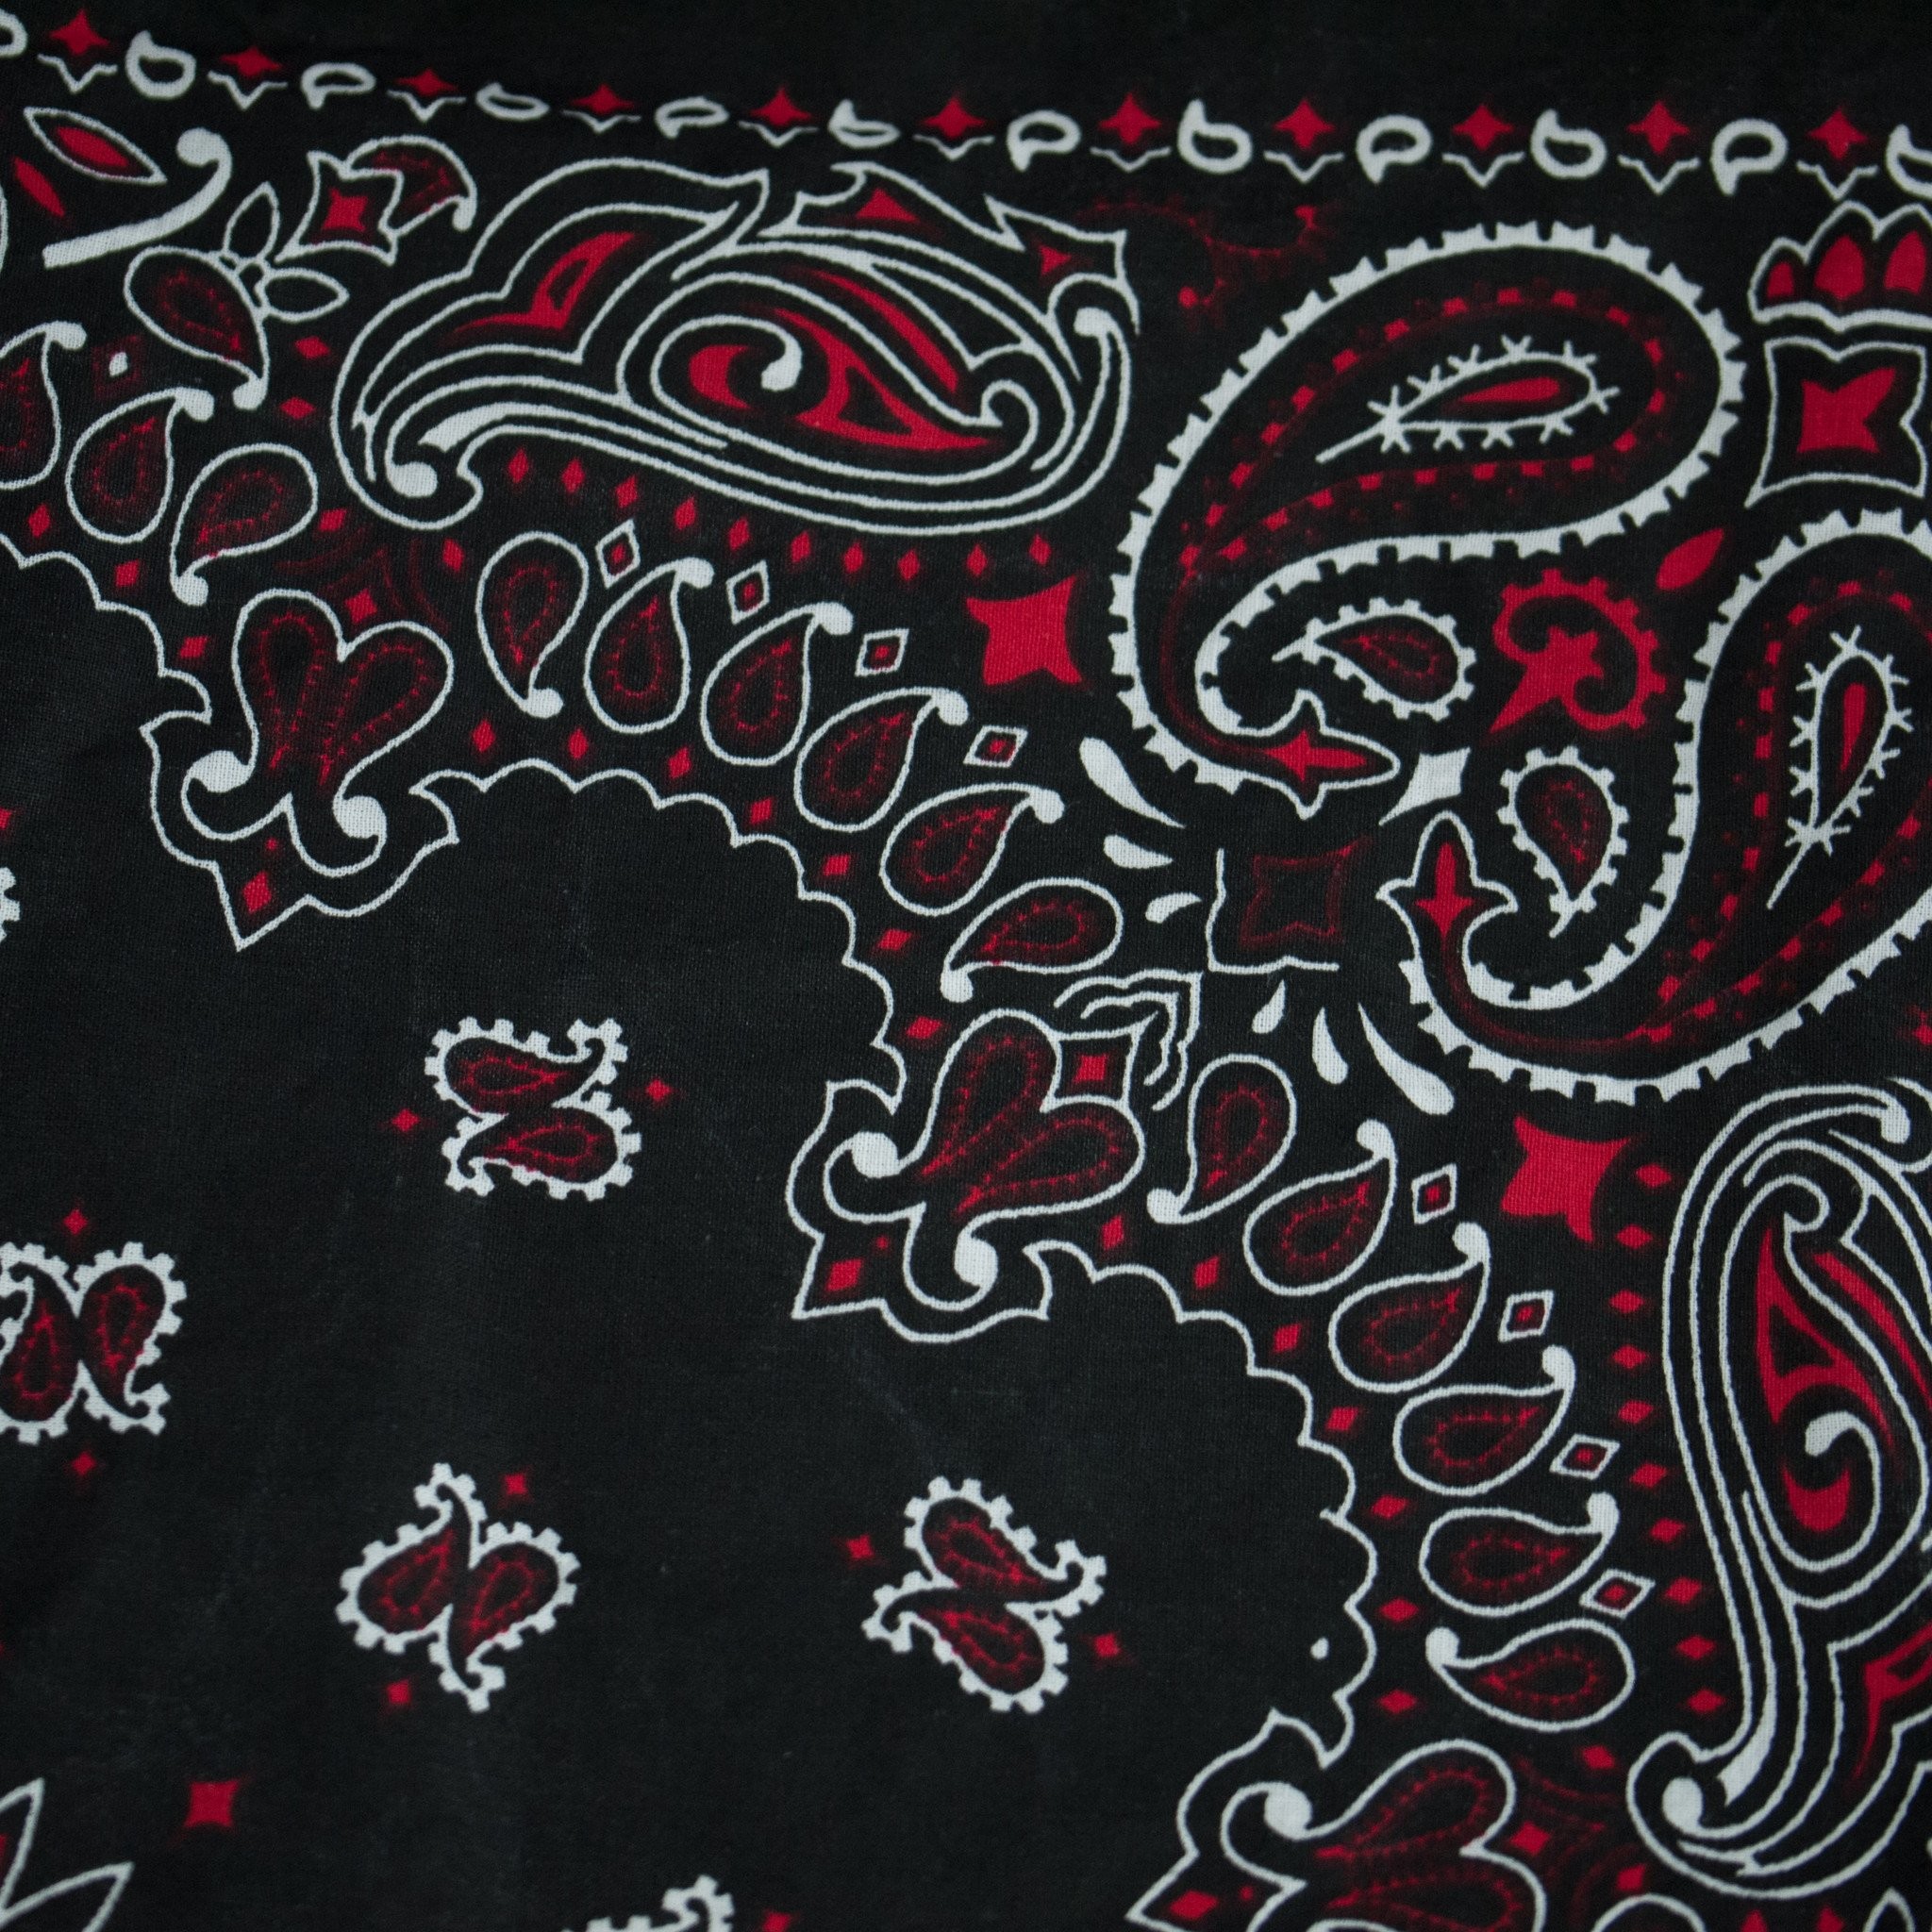 List 98+ Pictures Red And Black Bandana Wallpaper Full HD, 2k, 4k 10/2023